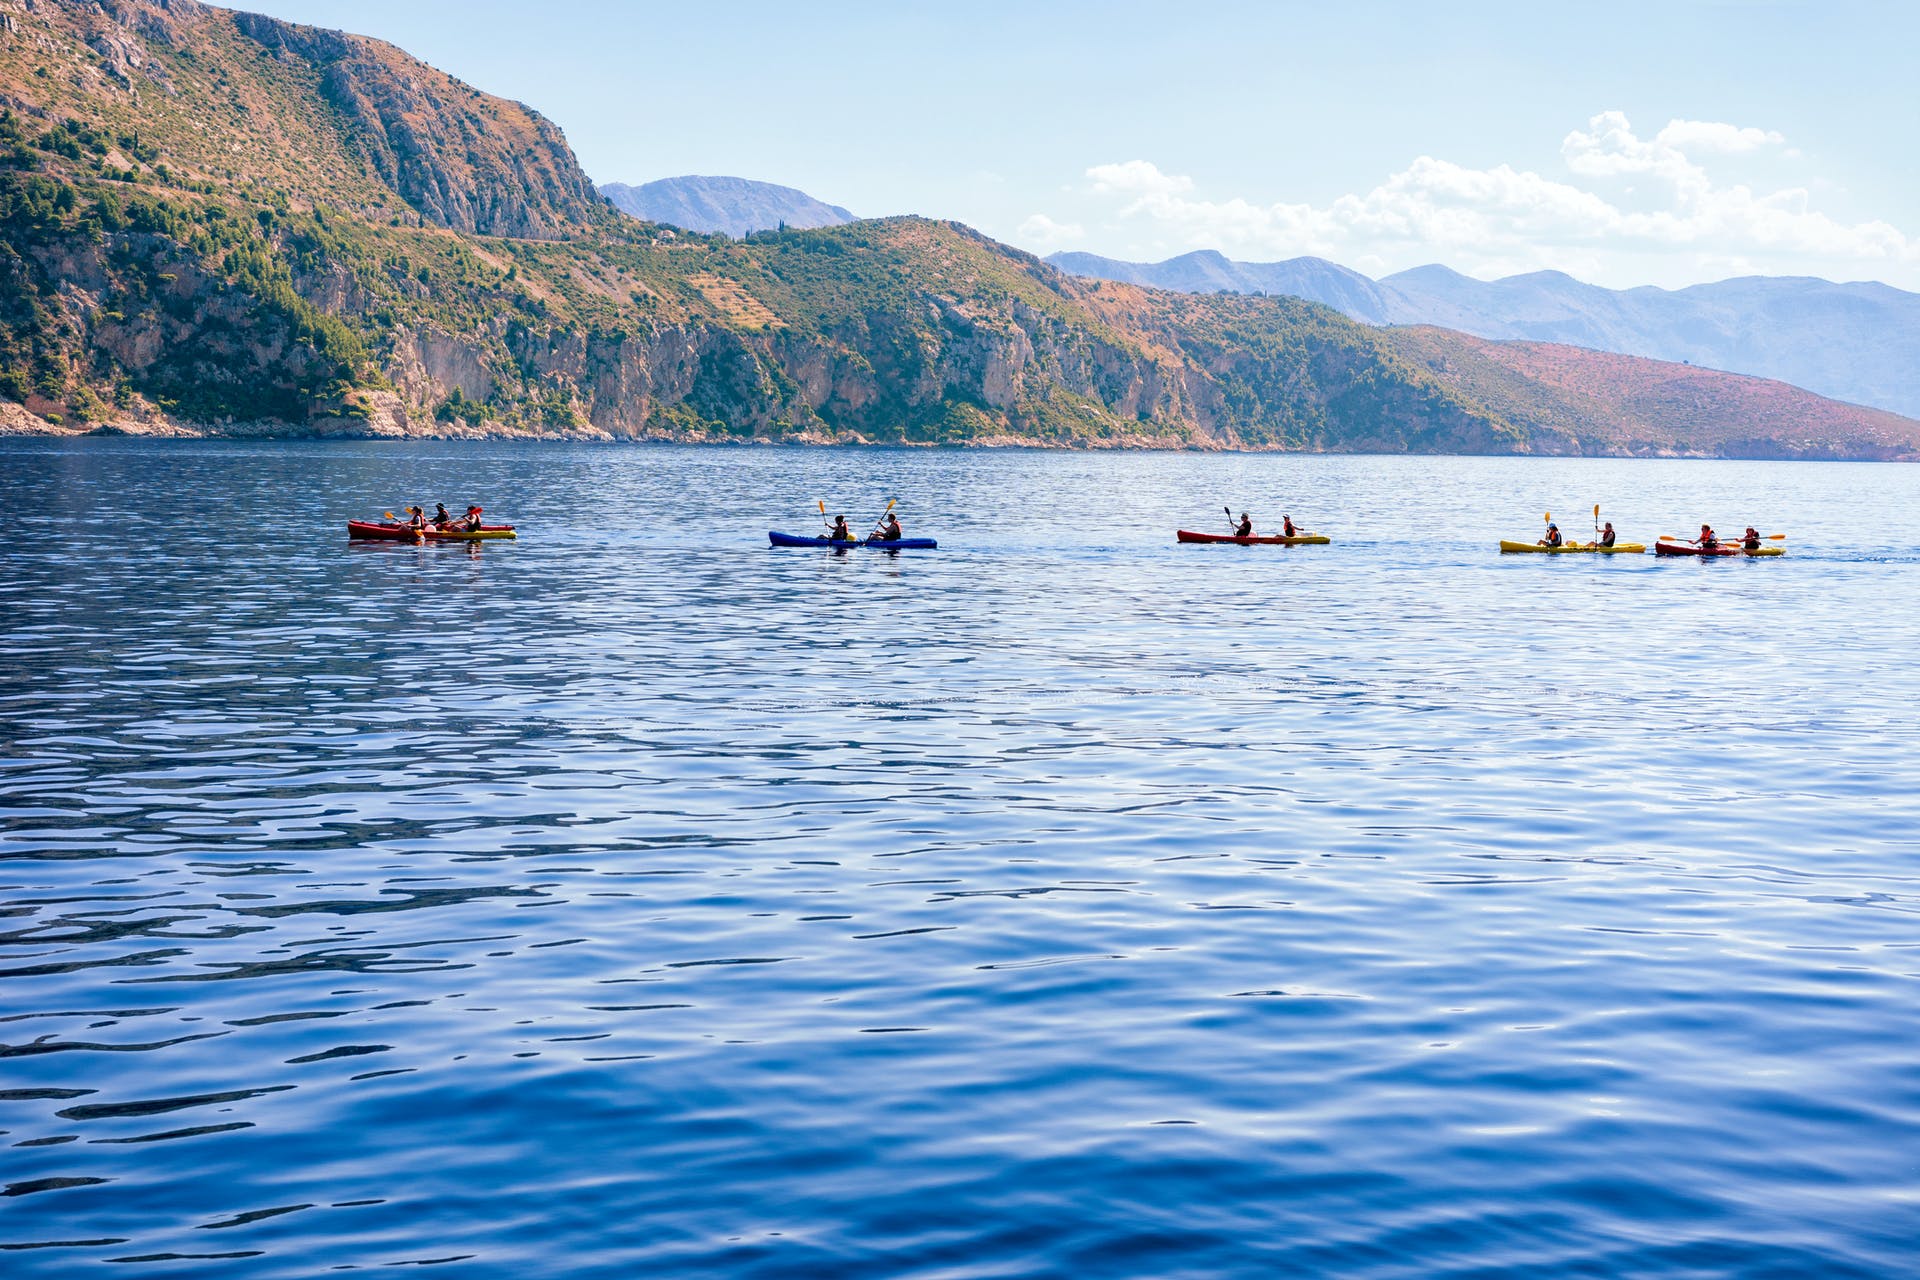 A group of sea kayakers on the calm seas in Croatia.